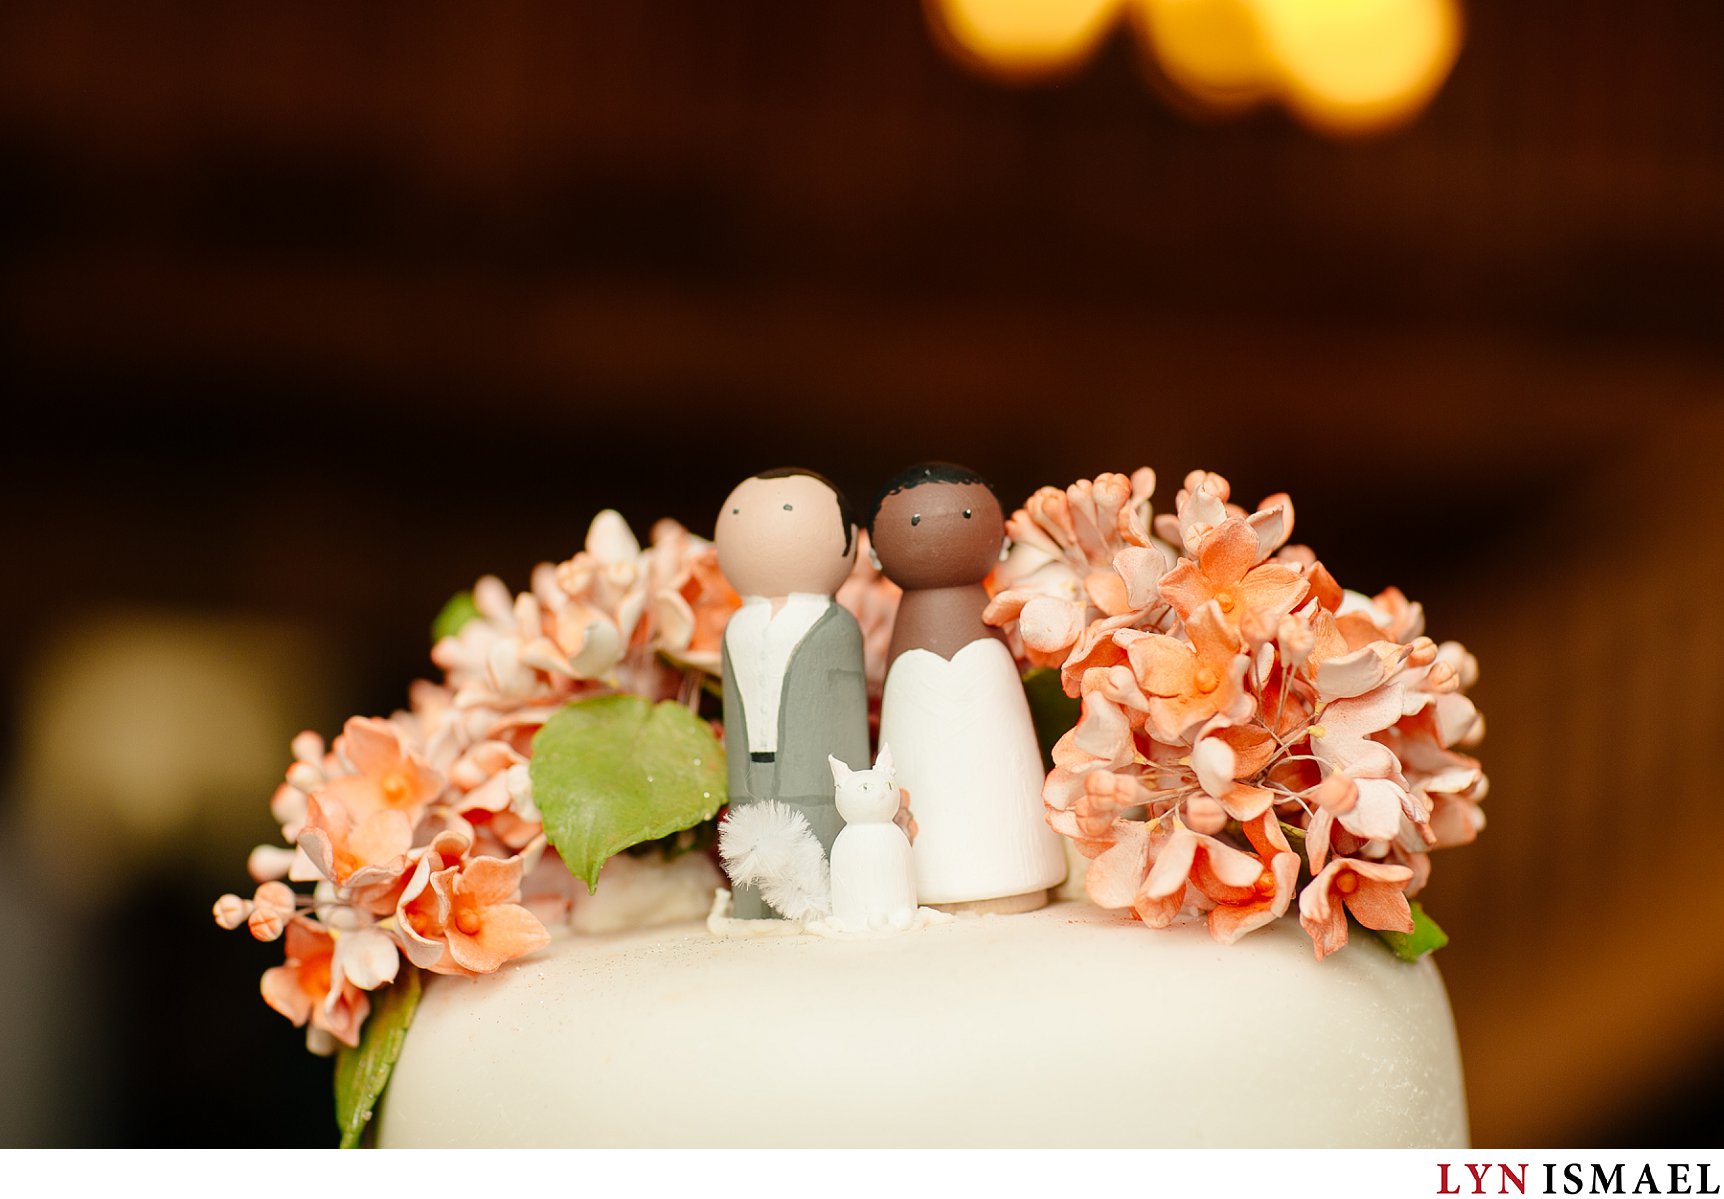 Cake topper featuring the bride and groom and their cat.